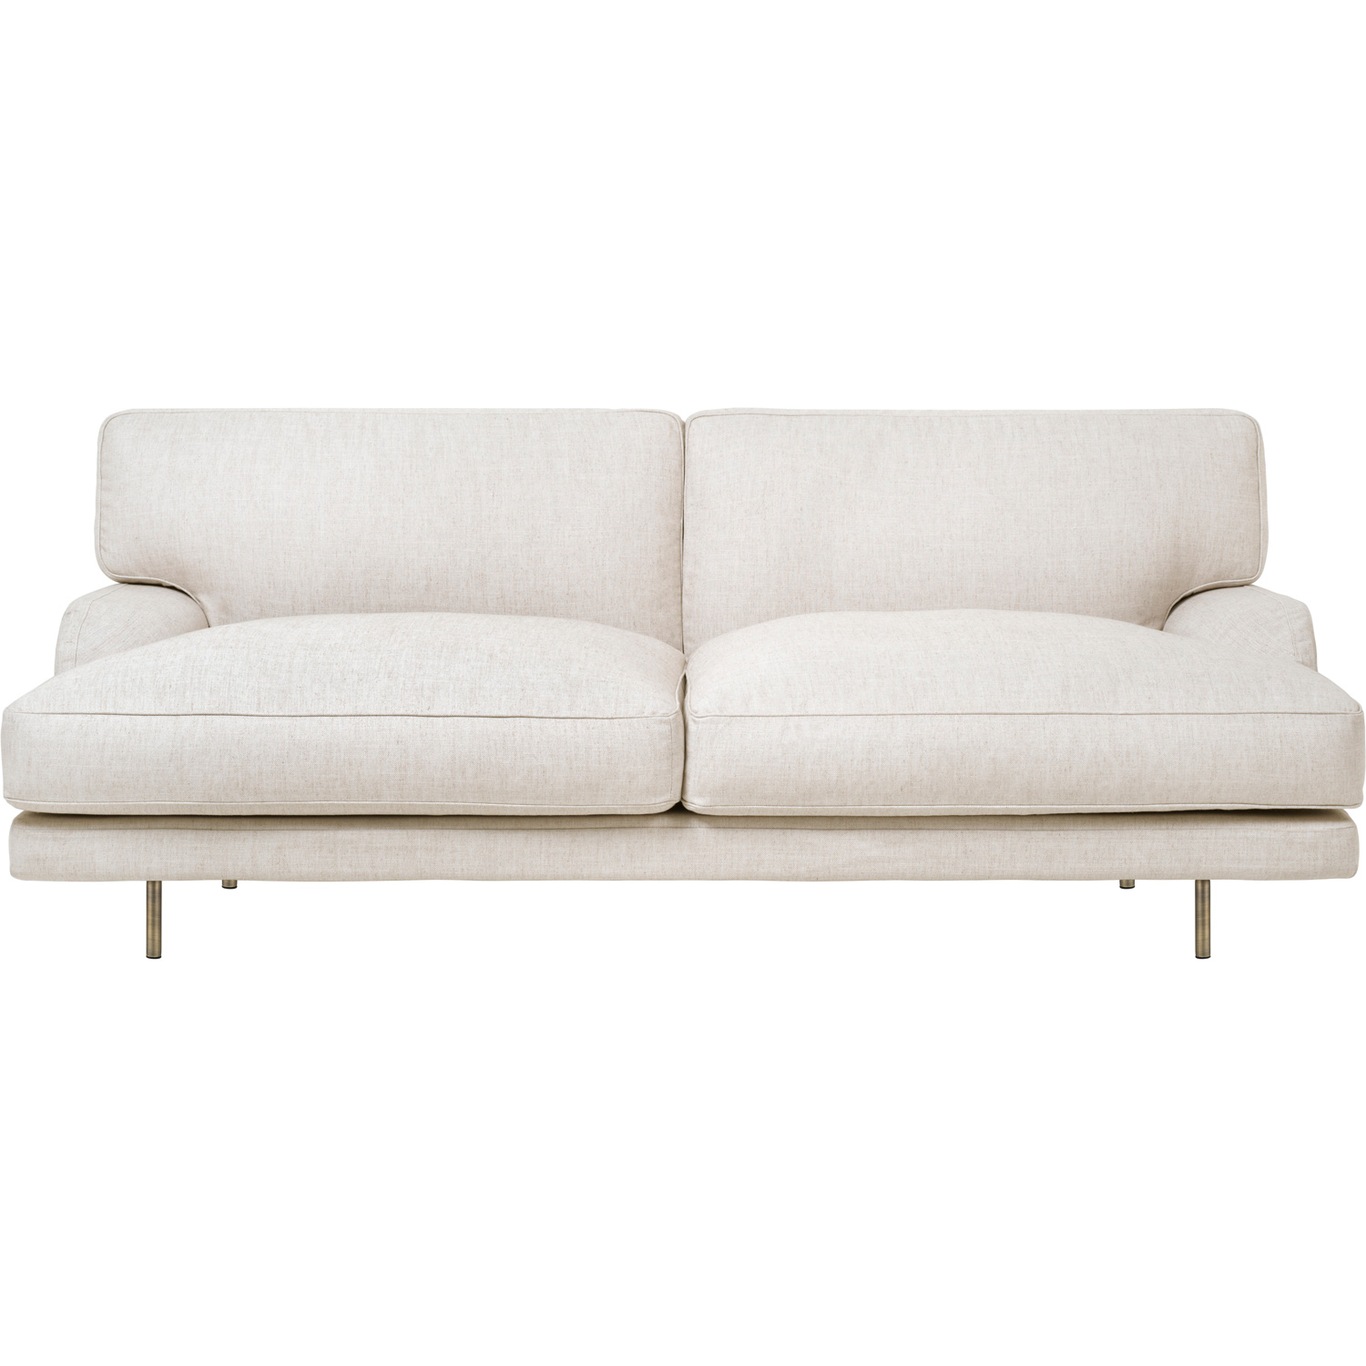 Flaneur Sofa LC 2-Seater, Legs Brass / Hot Madison 419 Off White